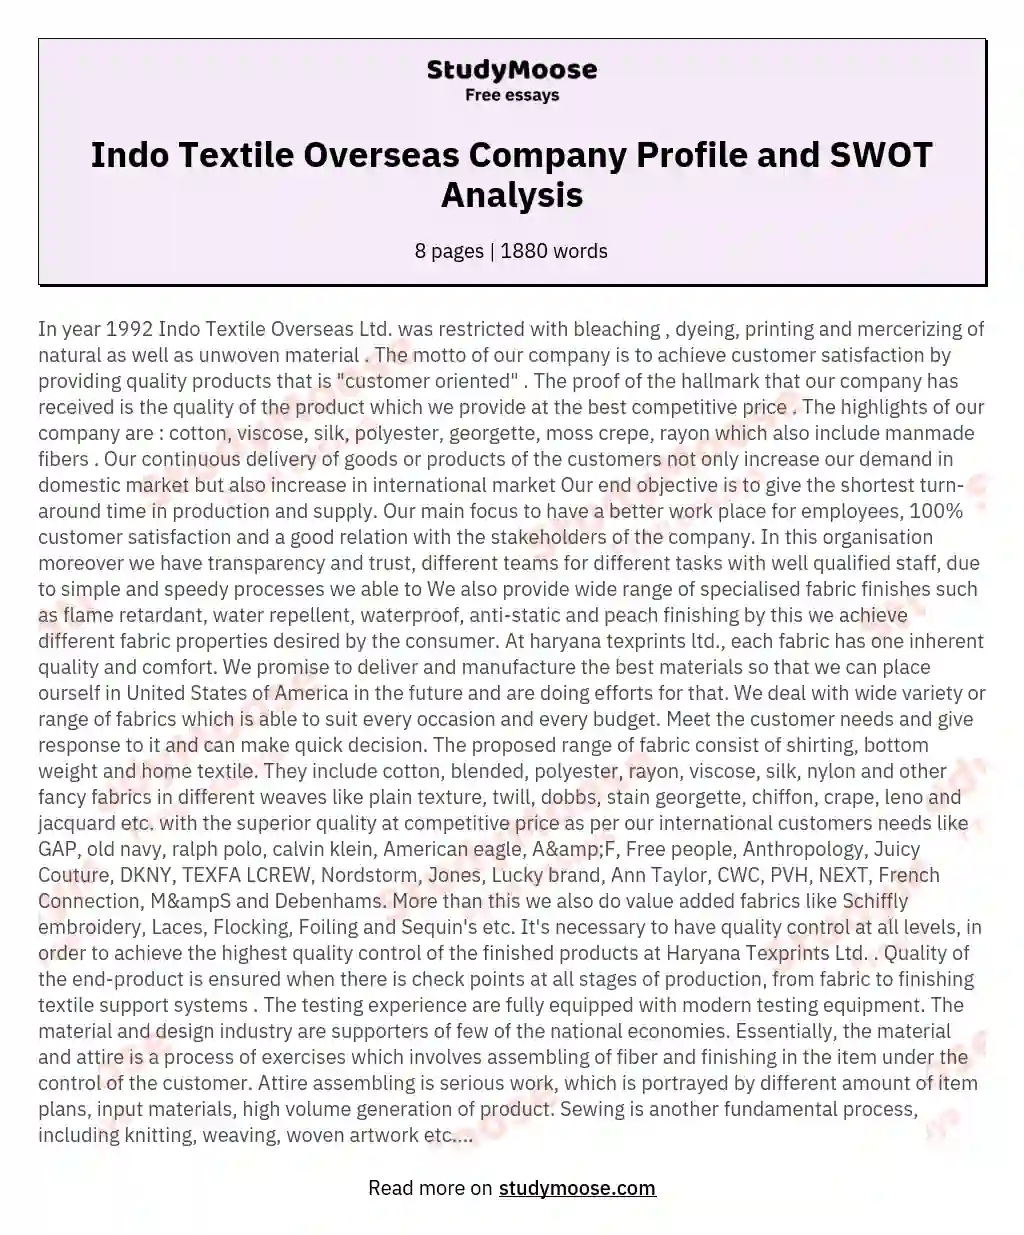 Indo Textile Overseas Company Profile and SWOT Analysis